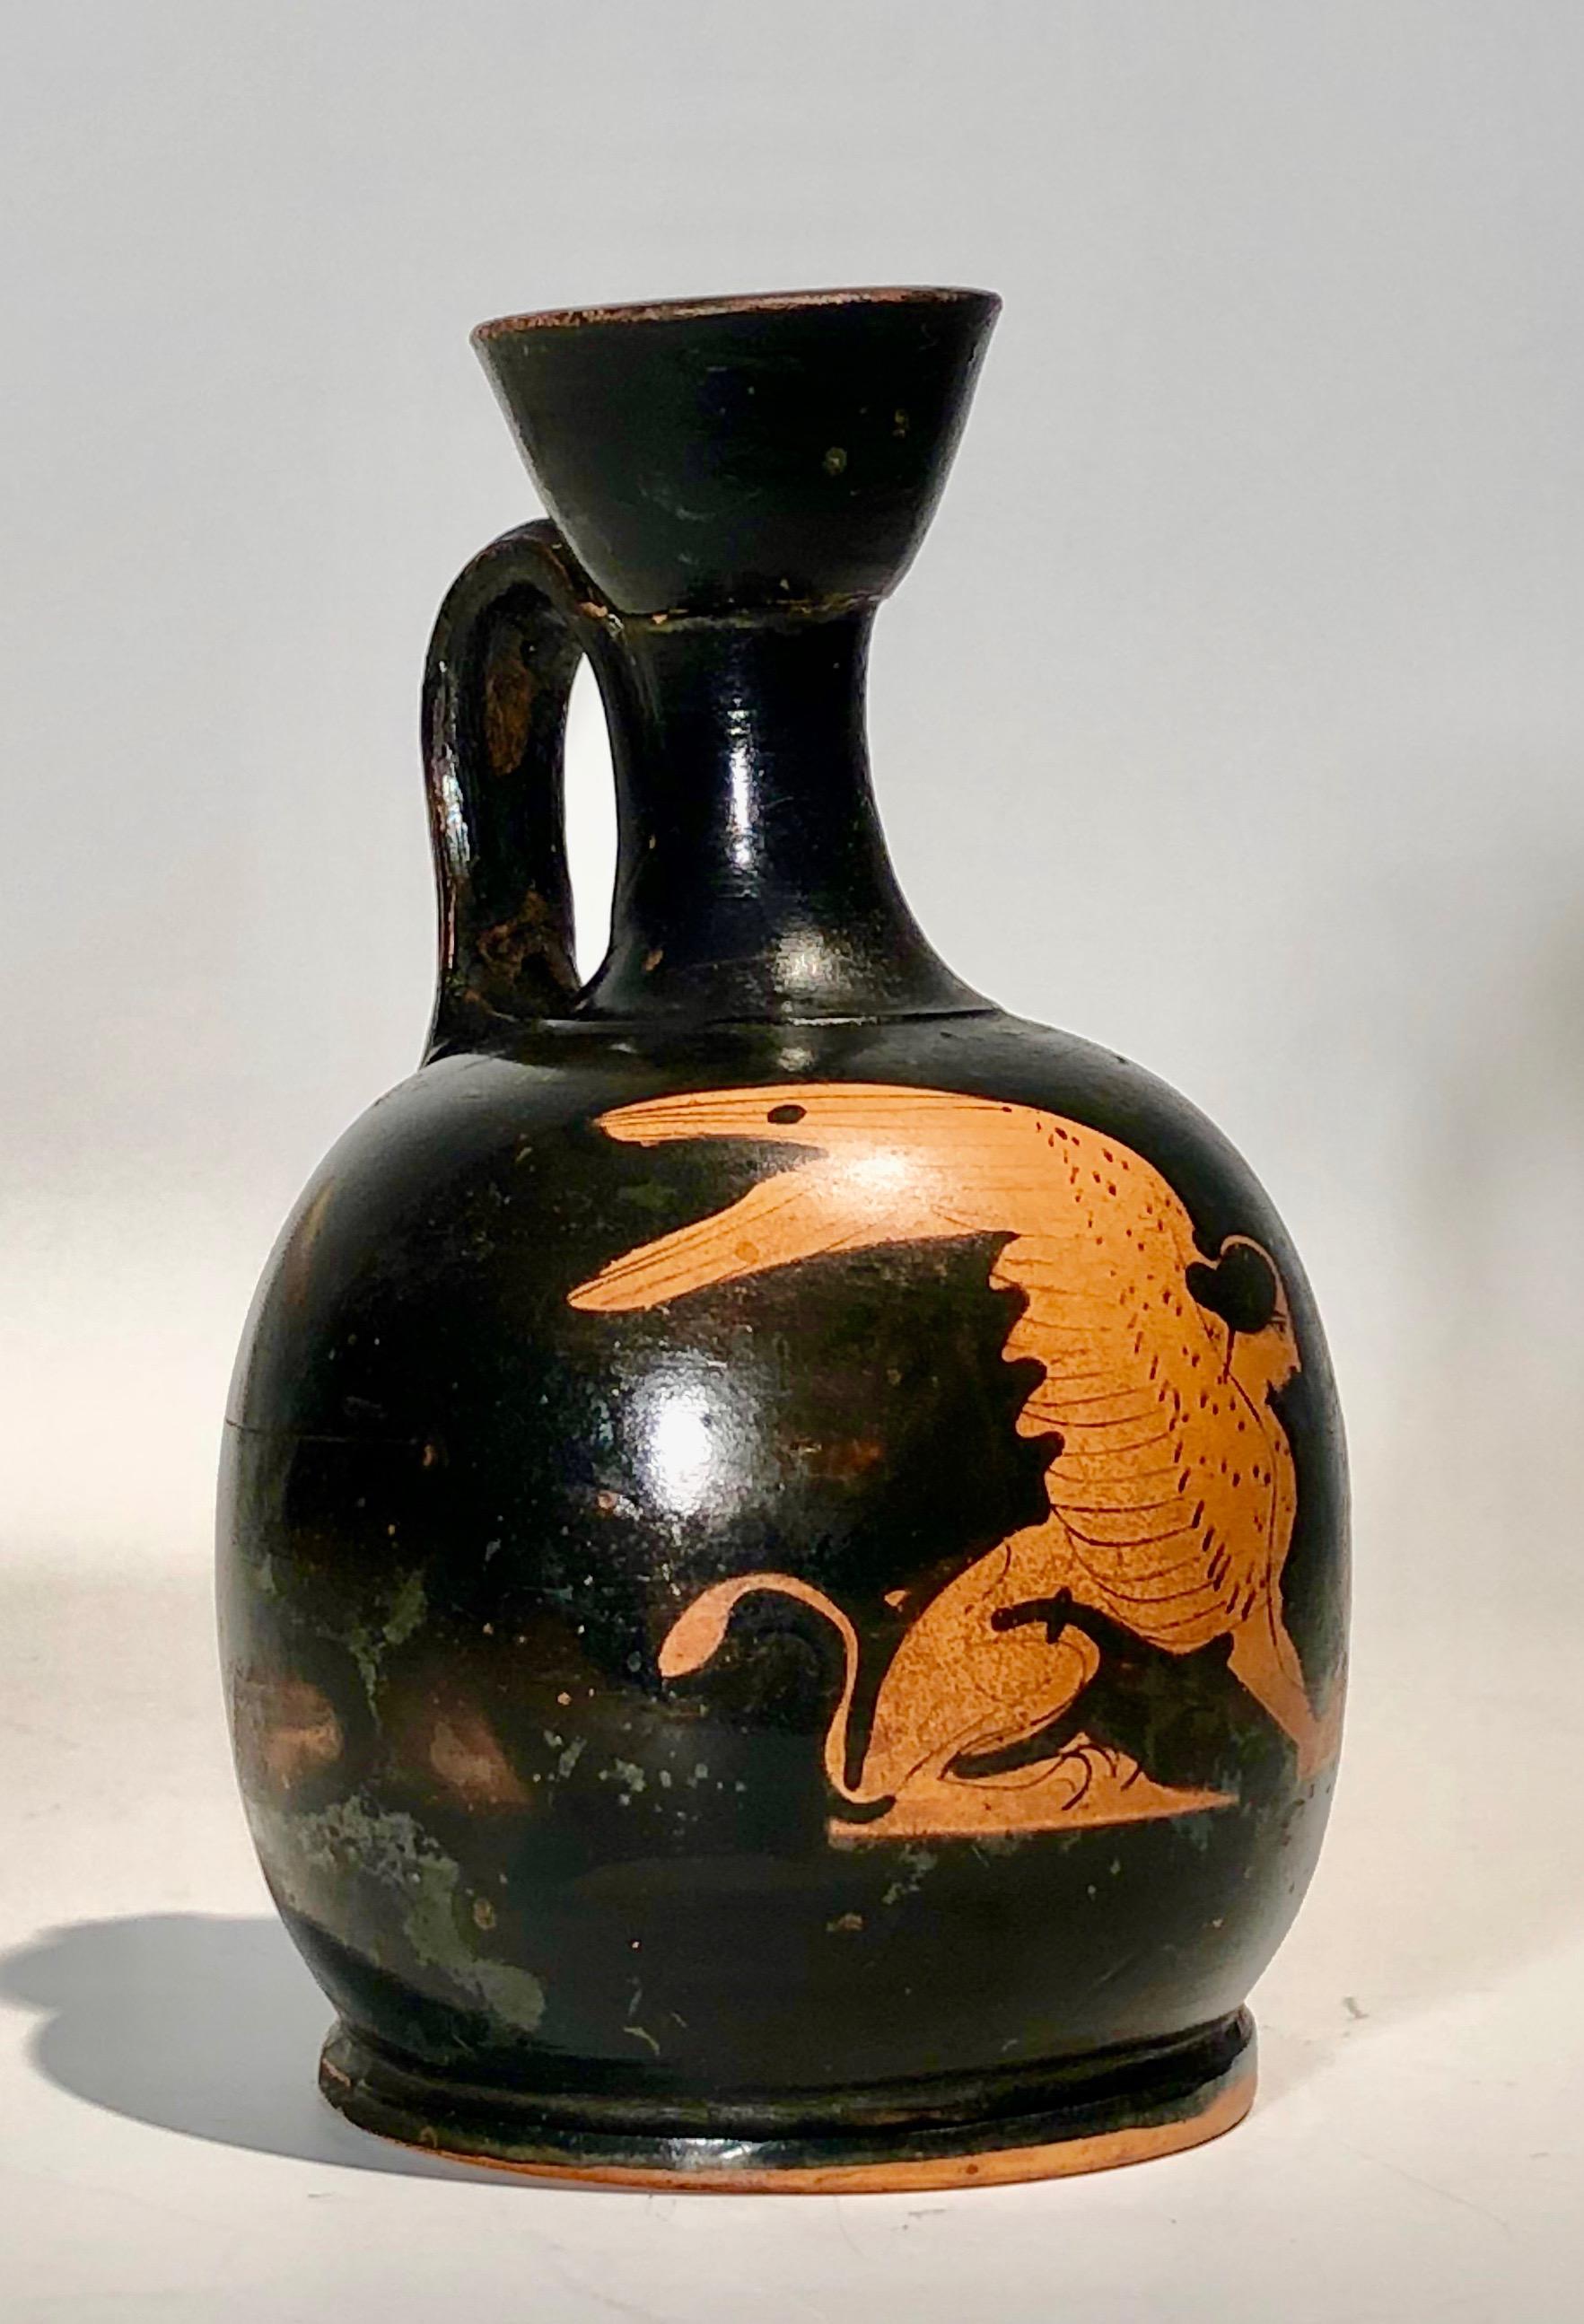 Attic RF charming squat-lekythos depicting a sphinx. Athens, 5th century BC. Intact. Provenance: Ex estate of
Mr. Bruno Fellinger (1926-2016), Sonnenrain 2, 8700 Küsnacht, Switzerland.
In Greek mythology, the sphinx is represented as a monster